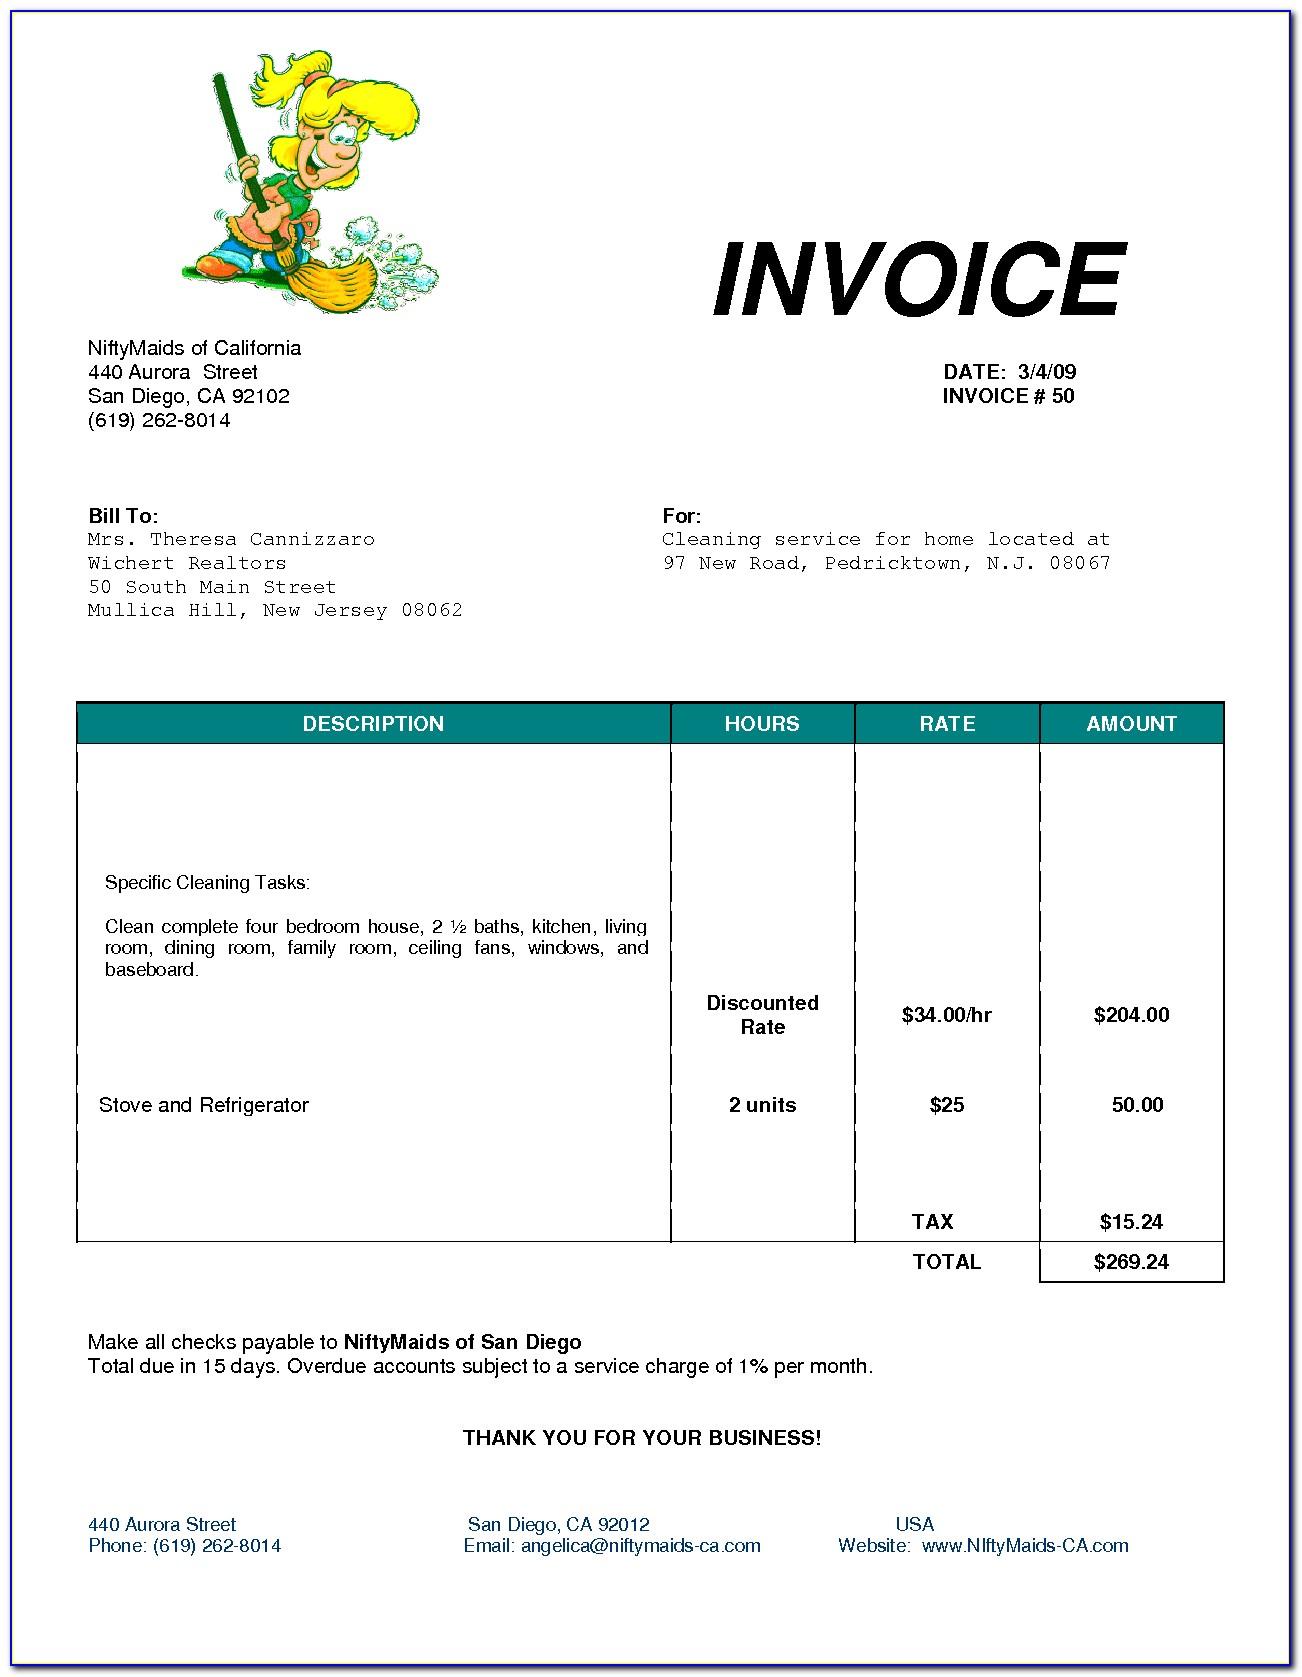 Templates For Invoices Uk